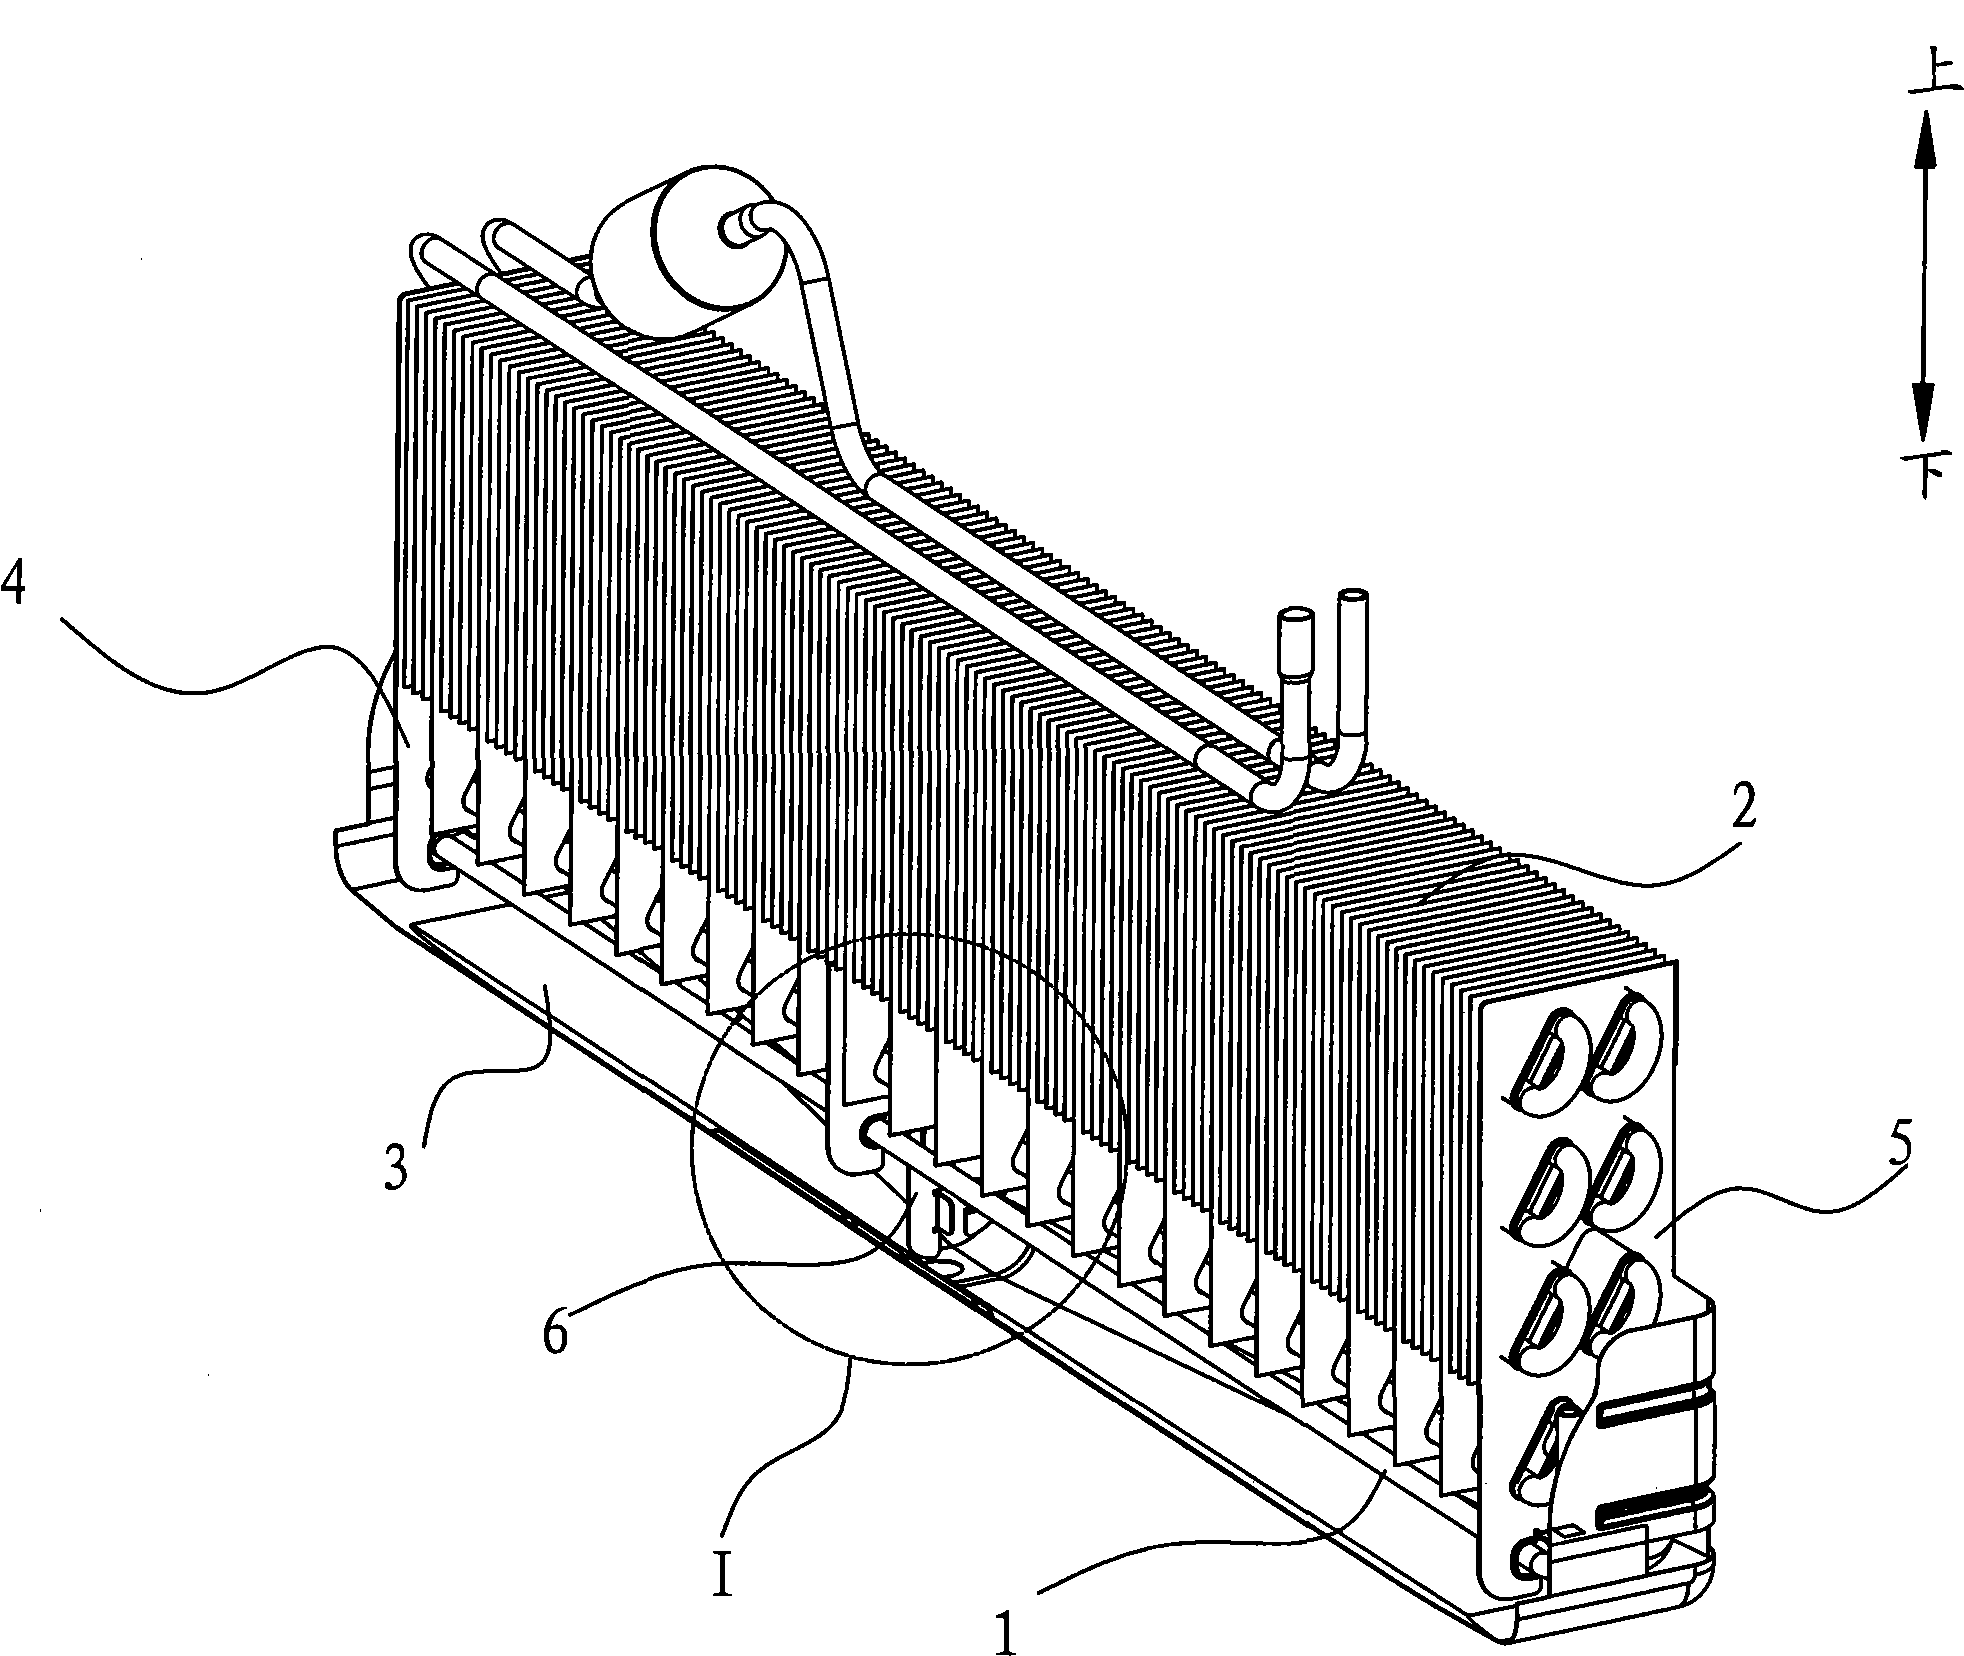 Defrosting heater, evaporator assembly of refrigerating equipment and refrigerator with same